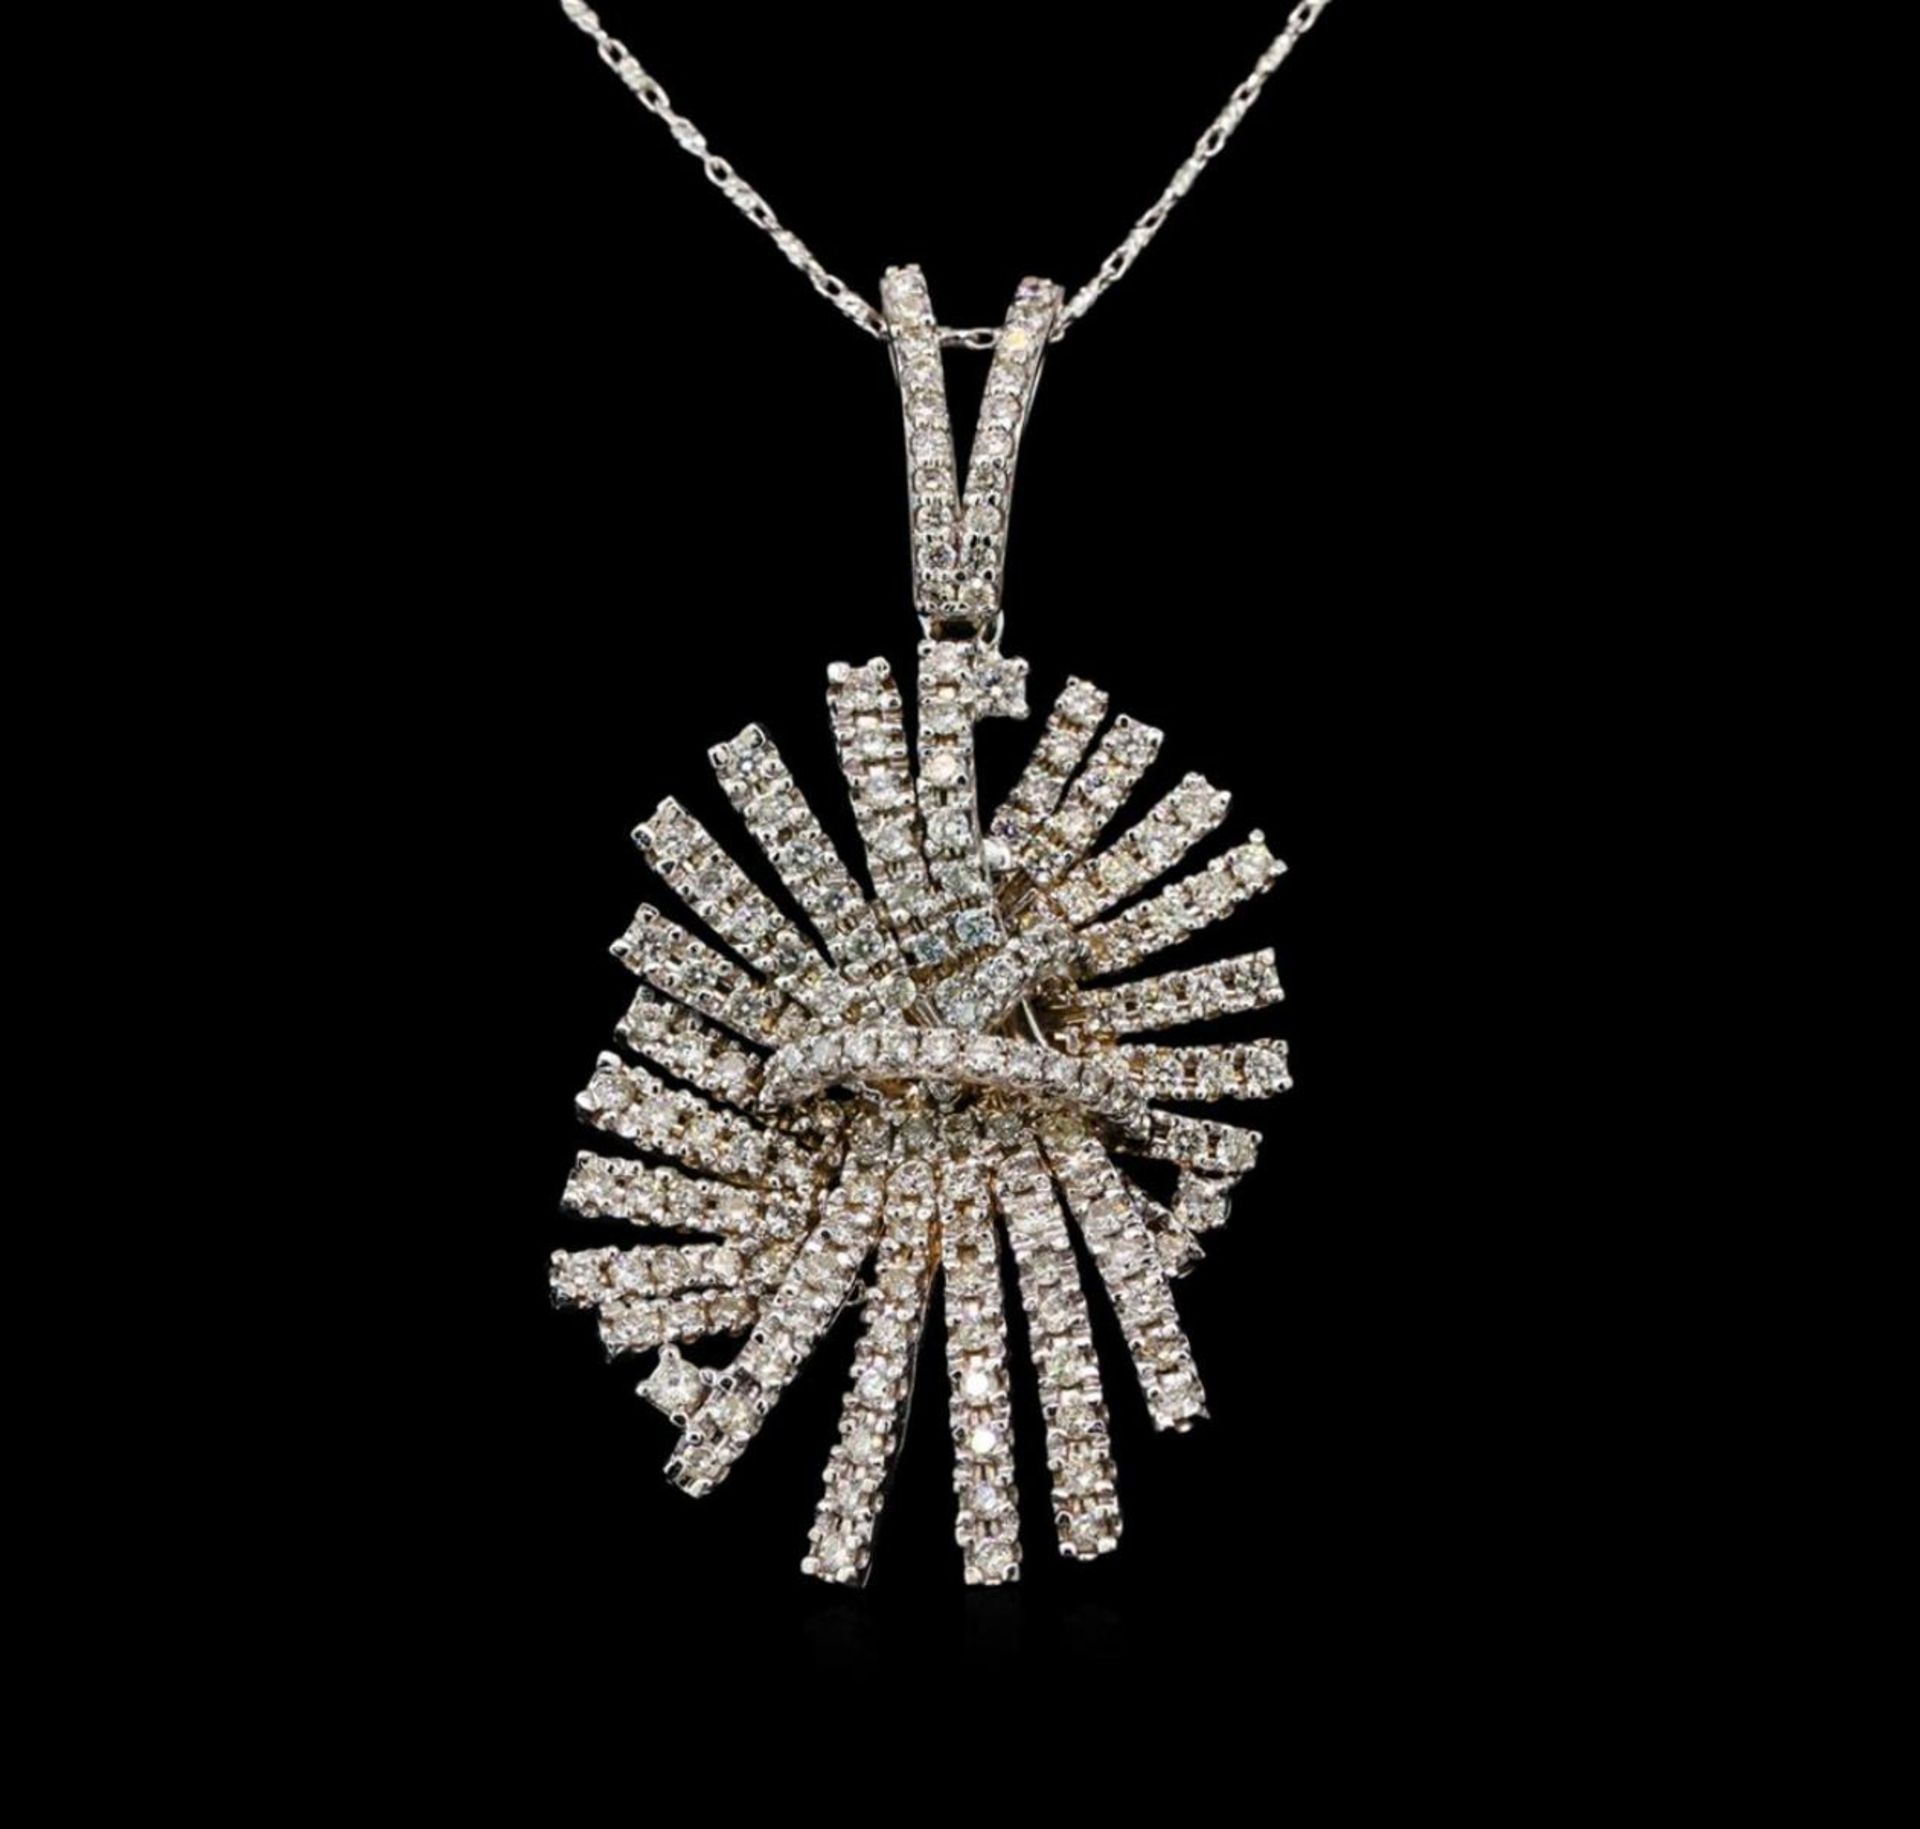 14KT White Gold 1.34 ctw Diamond Pendant With Chain - Image 2 of 3